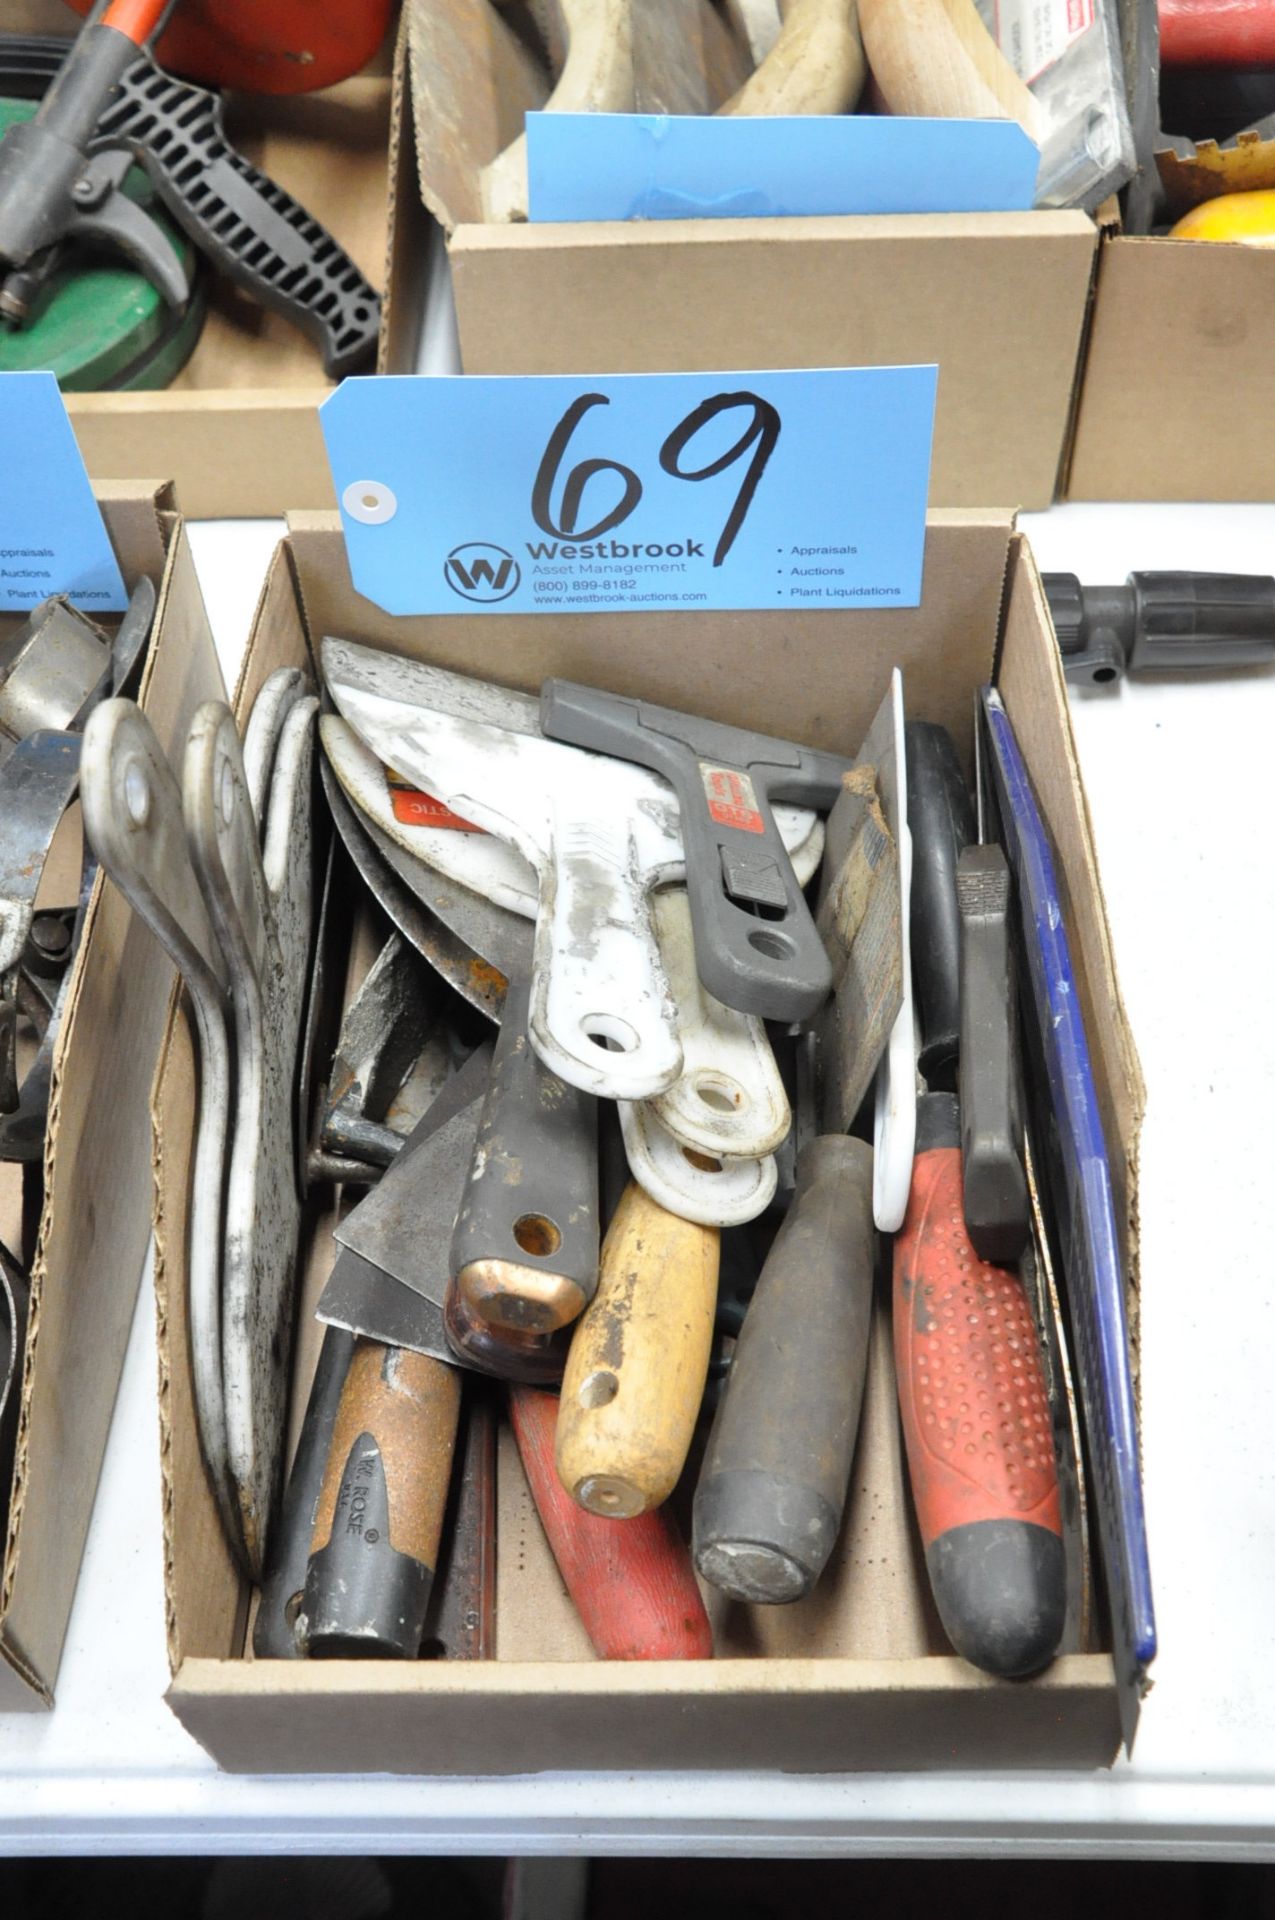 Lot-Scrapers, Drywall Tools, Paint Pans and Tools Etc. in (4) Boxes